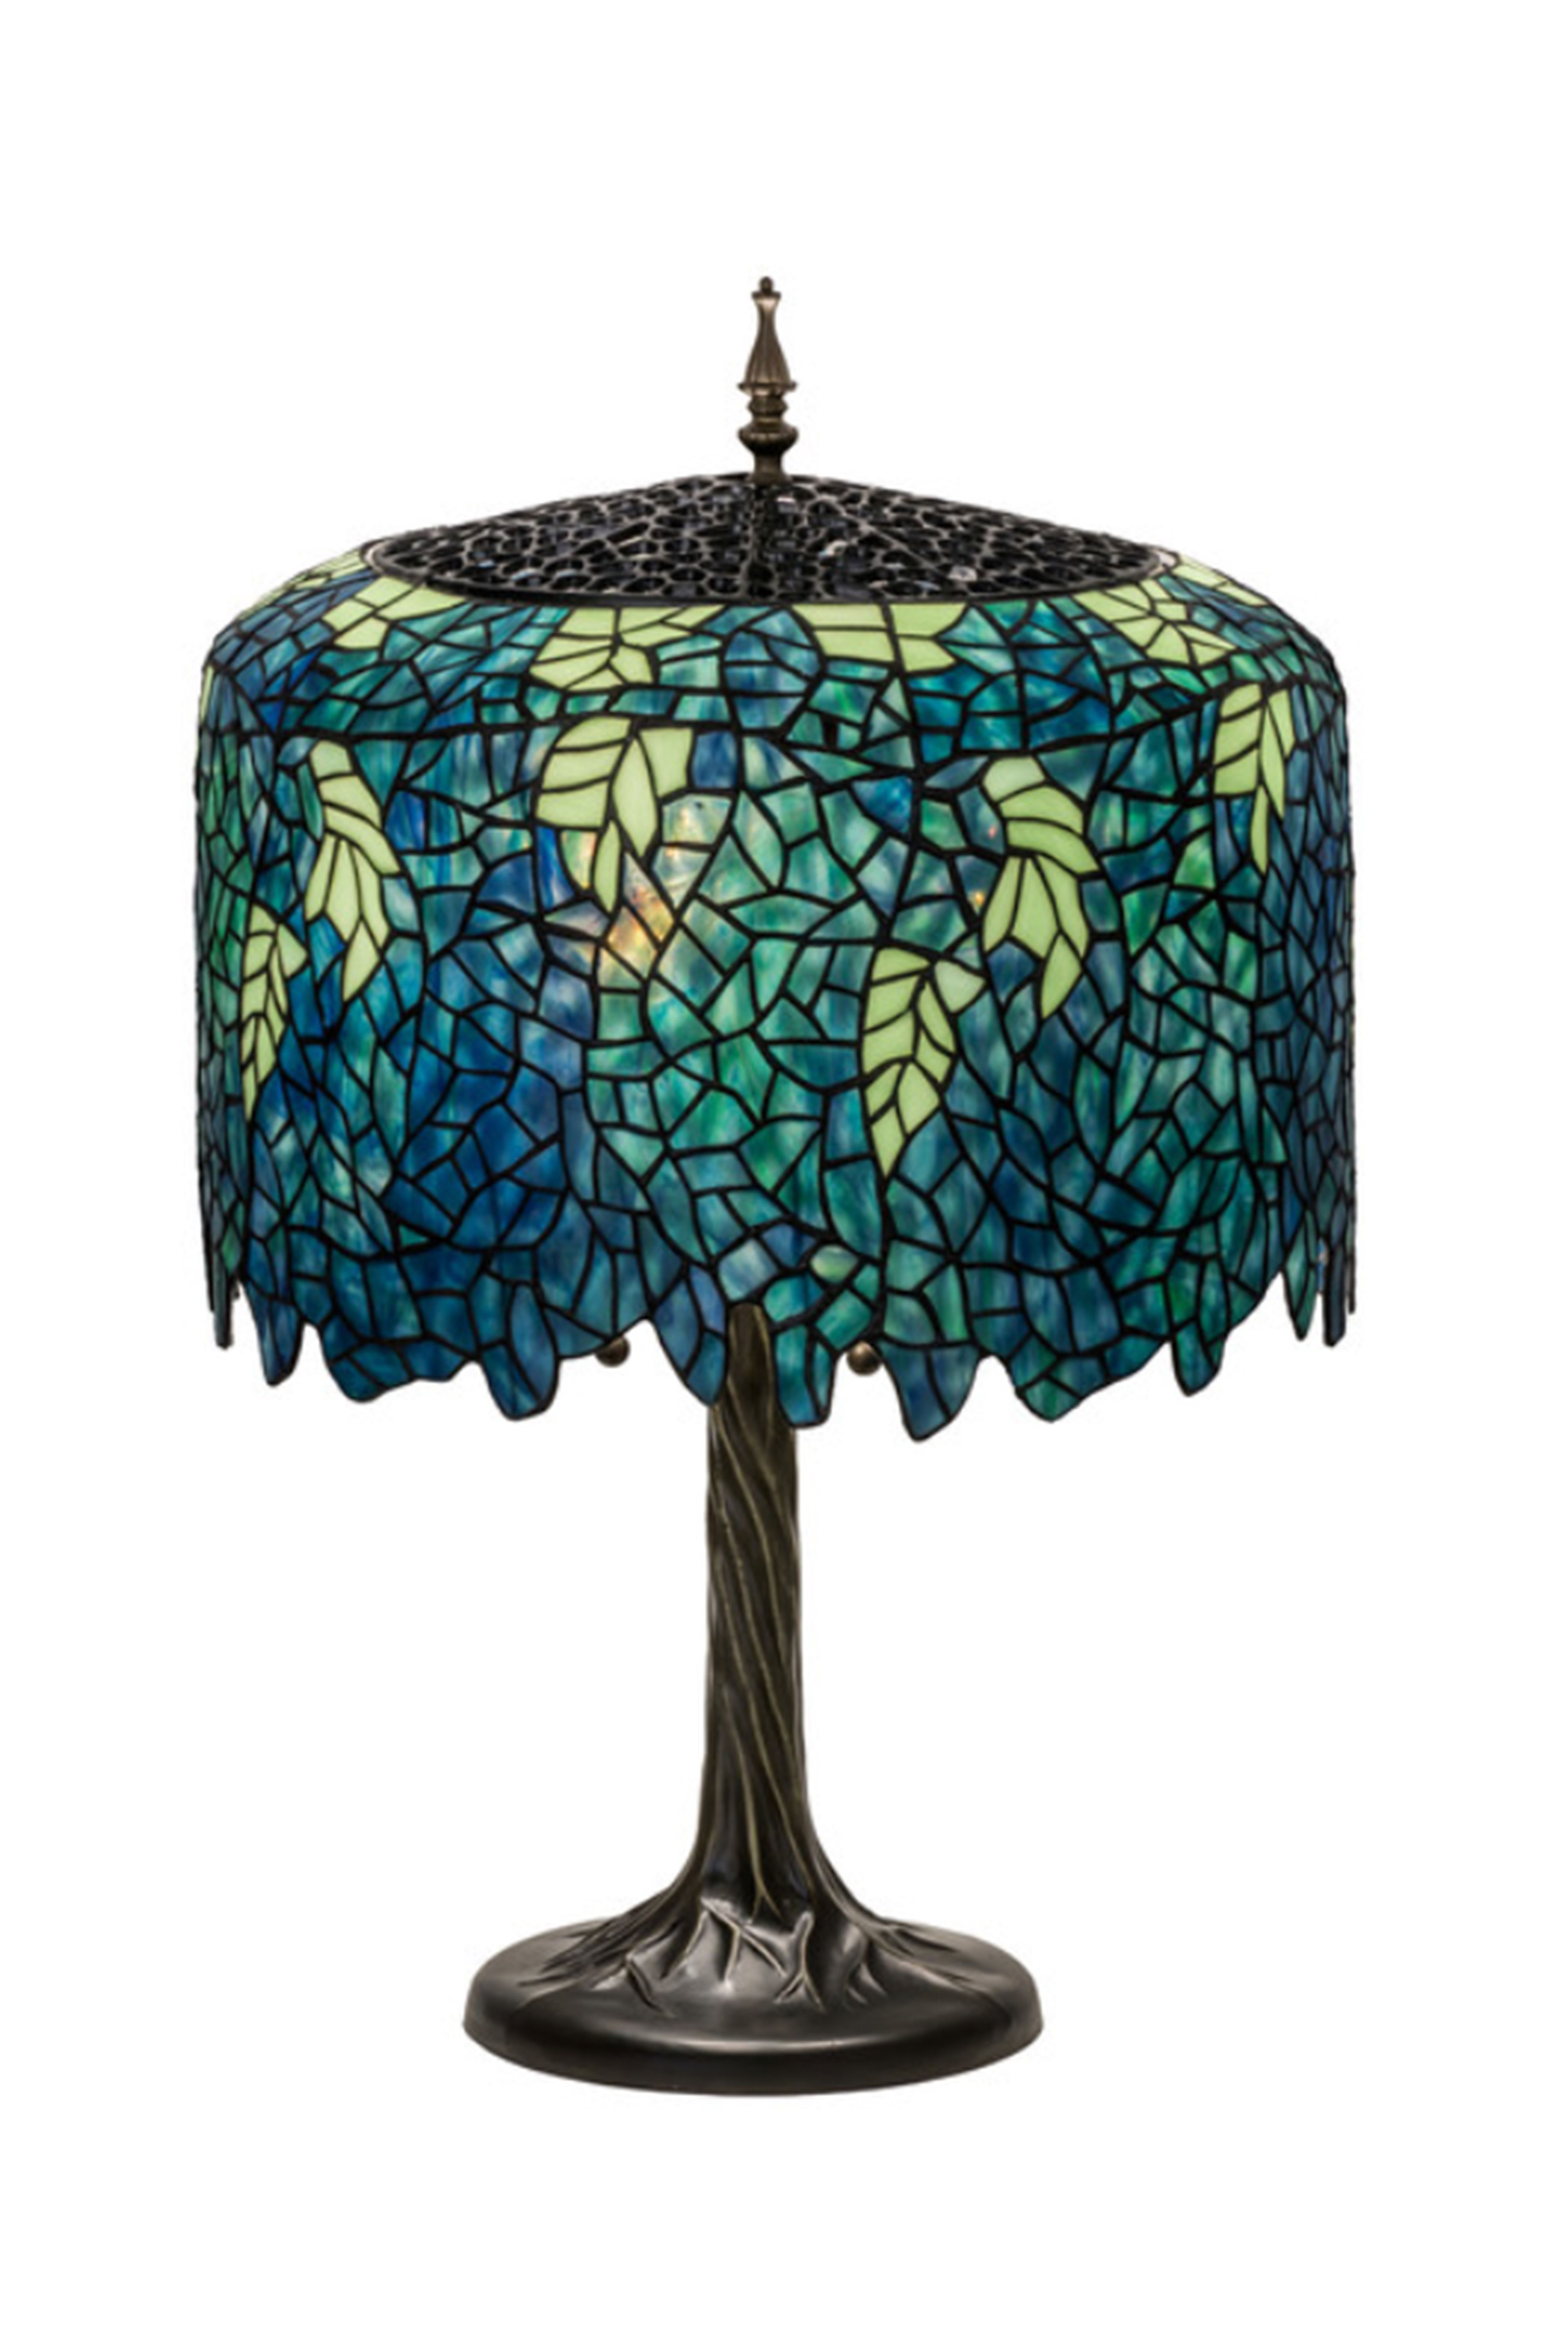 15 Best Tiffany-Style Lamps to Buy Online - Shop Tiffany Lamps